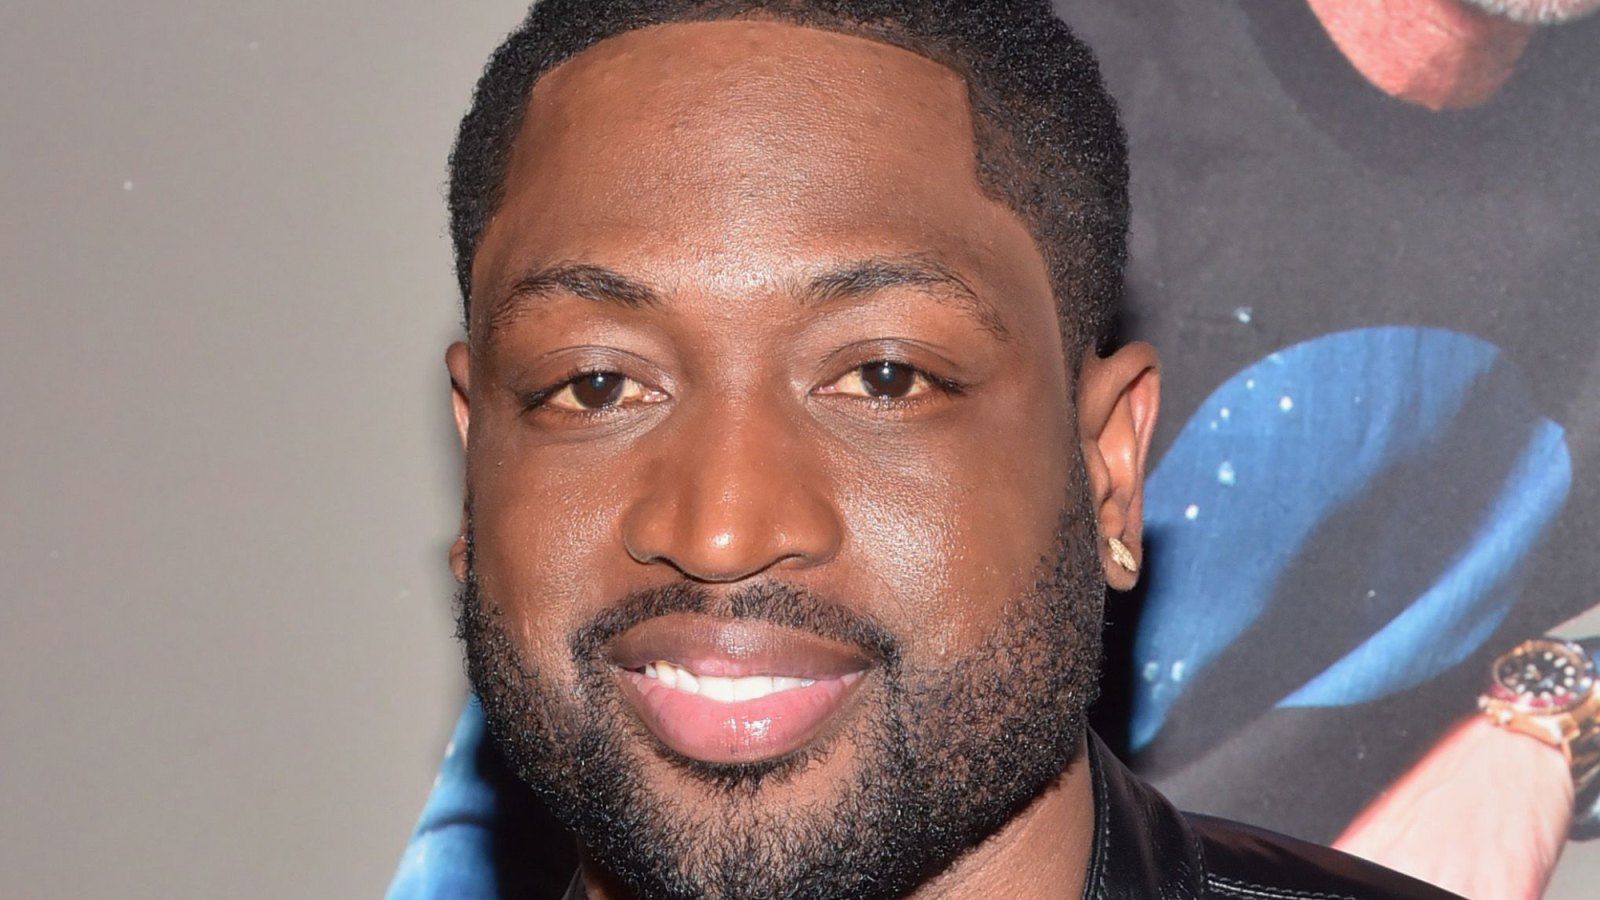 Dwyane Wade Hits Back Trolls Who Criticized His Son for Wearing Fake Nails in Photos